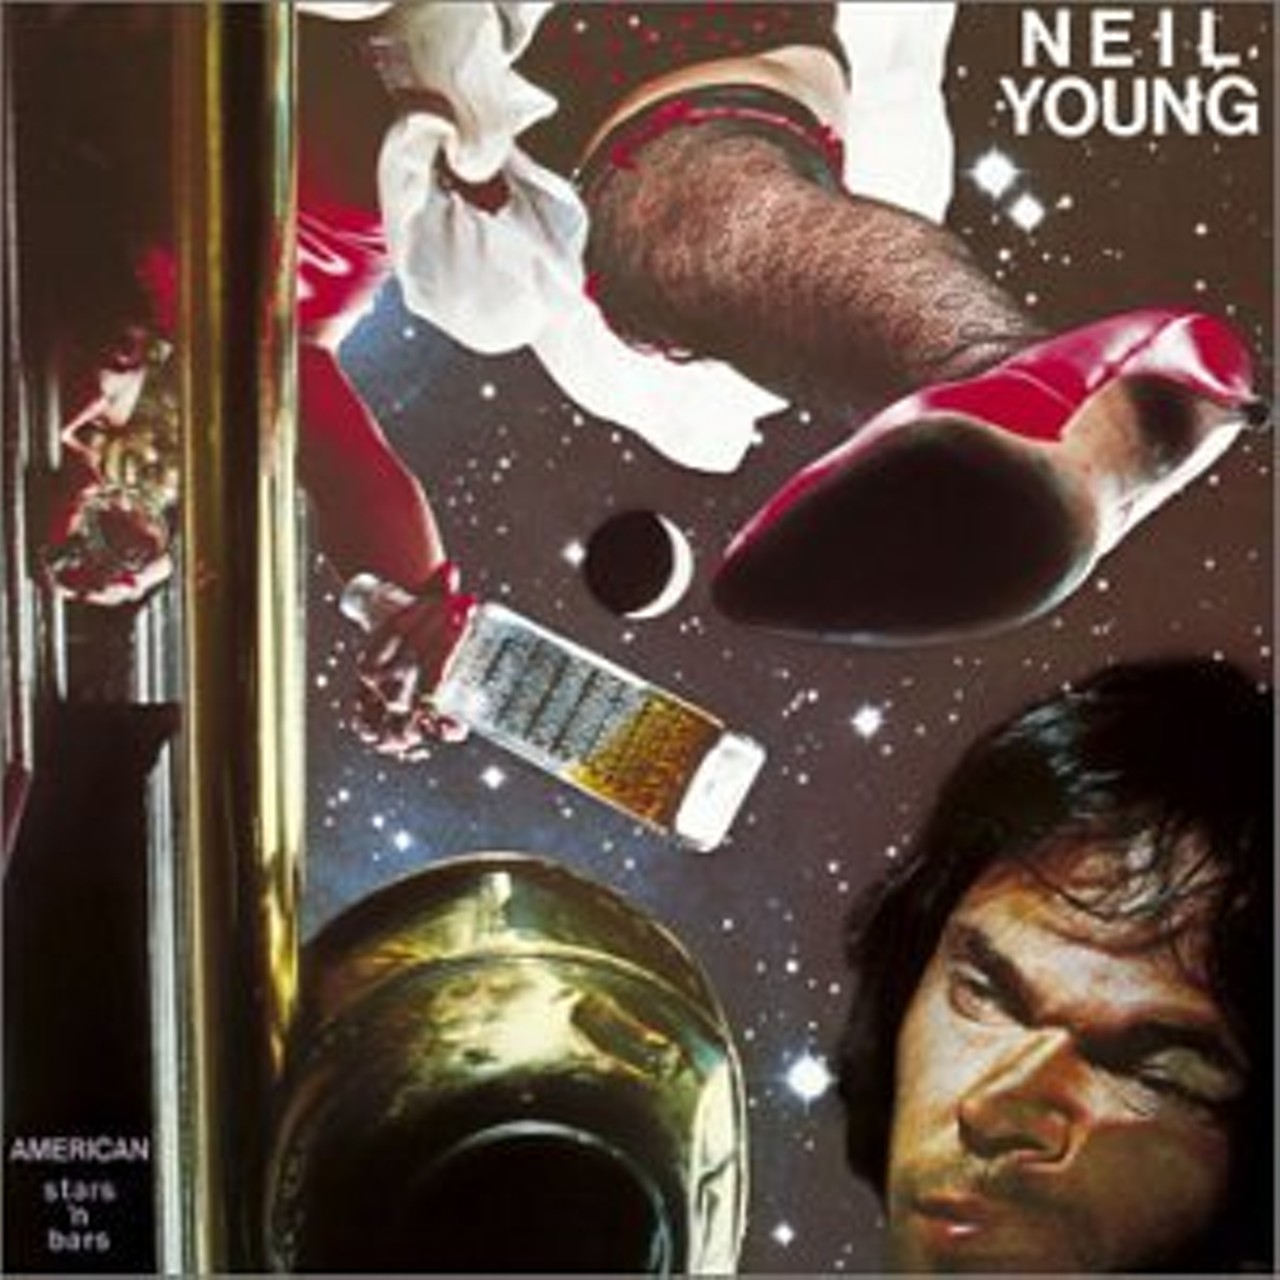 19. Neil Young's "American Stars 'n Bars" cover features an intoxicated Young, apparently bested by the bottle of Canadian whiskey in the pretty lady's hand. Yes, CANADIAN whiskey. Wikipedia told us so. Fail, Young.